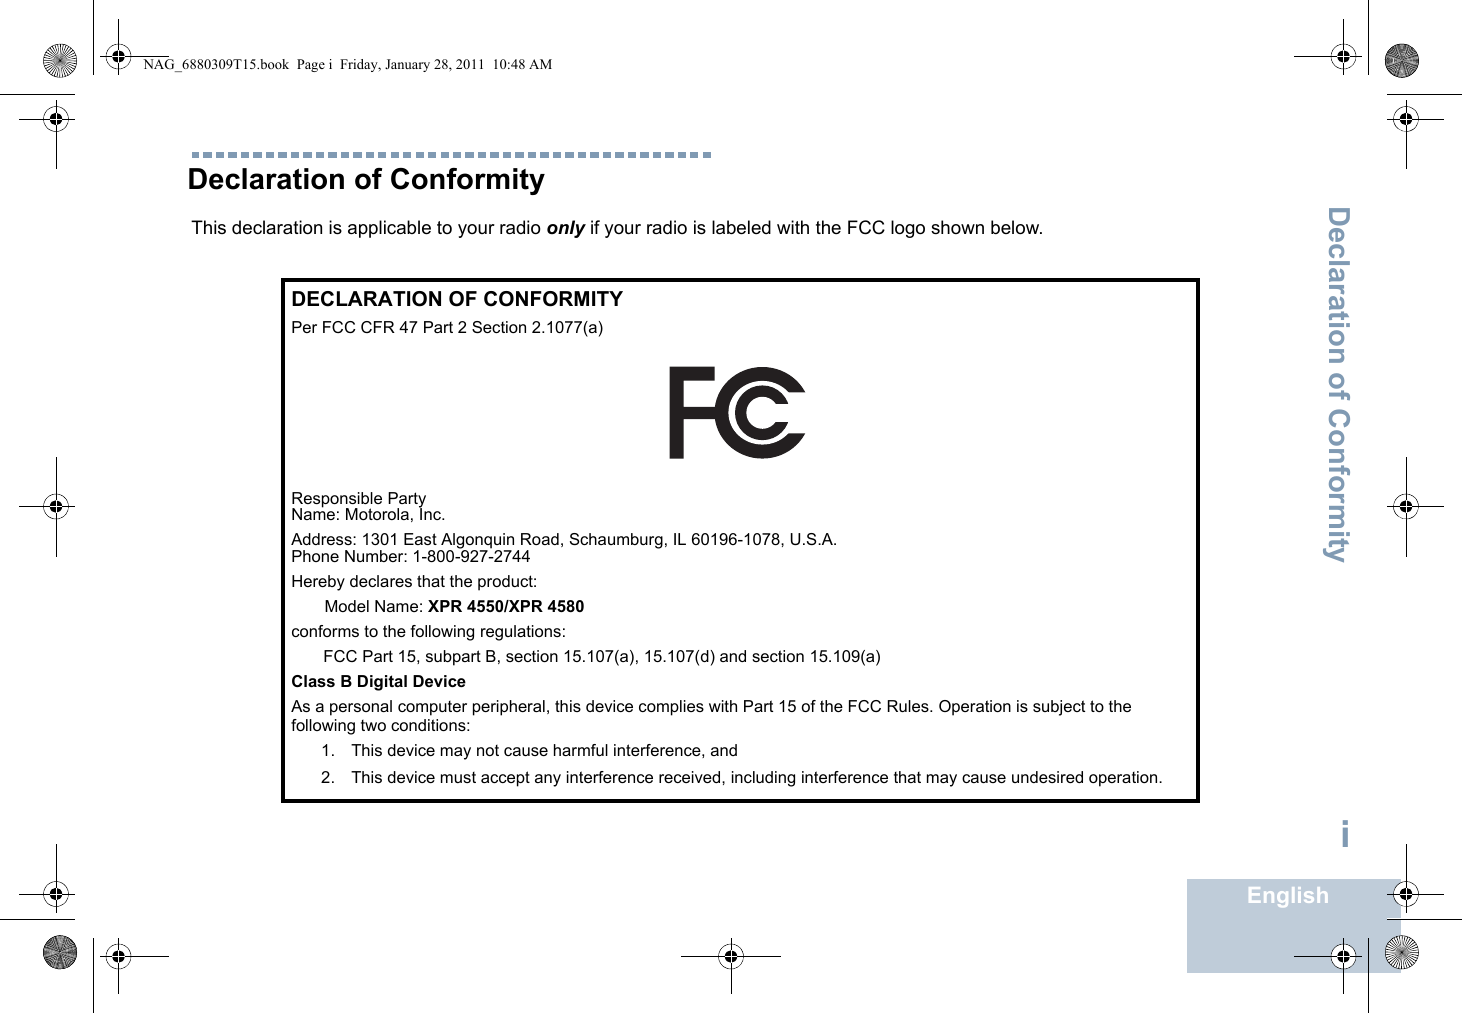 Declaration of ConformityEnglishiDeclaration of ConformityThis declaration is applicable to your radio only if your radio is labeled with the FCC logo shown below.DECLARATION OF CONFORMITYPer FCC CFR 47 Part 2 Section 2.1077(a)Responsible Party Name: Motorola, Inc.Address: 1301 East Algonquin Road, Schaumburg, IL 60196-1078, U.S.A.Phone Number: 1-800-927-2744Hereby declares that the product:Model Name: XPR 4550/XPR 4580conforms to the following regulations:FCC Part 15, subpart B, section 15.107(a), 15.107(d) and section 15.109(a)Class B Digital DeviceAs a personal computer peripheral, this device complies with Part 15 of the FCC Rules. Operation is subject to the following two conditions:1. This device may not cause harmful interference, and 2. This device must accept any interference received, including interference that may cause undesired operation.NAG_6880309T15.book  Page i  Friday, January 28, 2011  10:48 AM